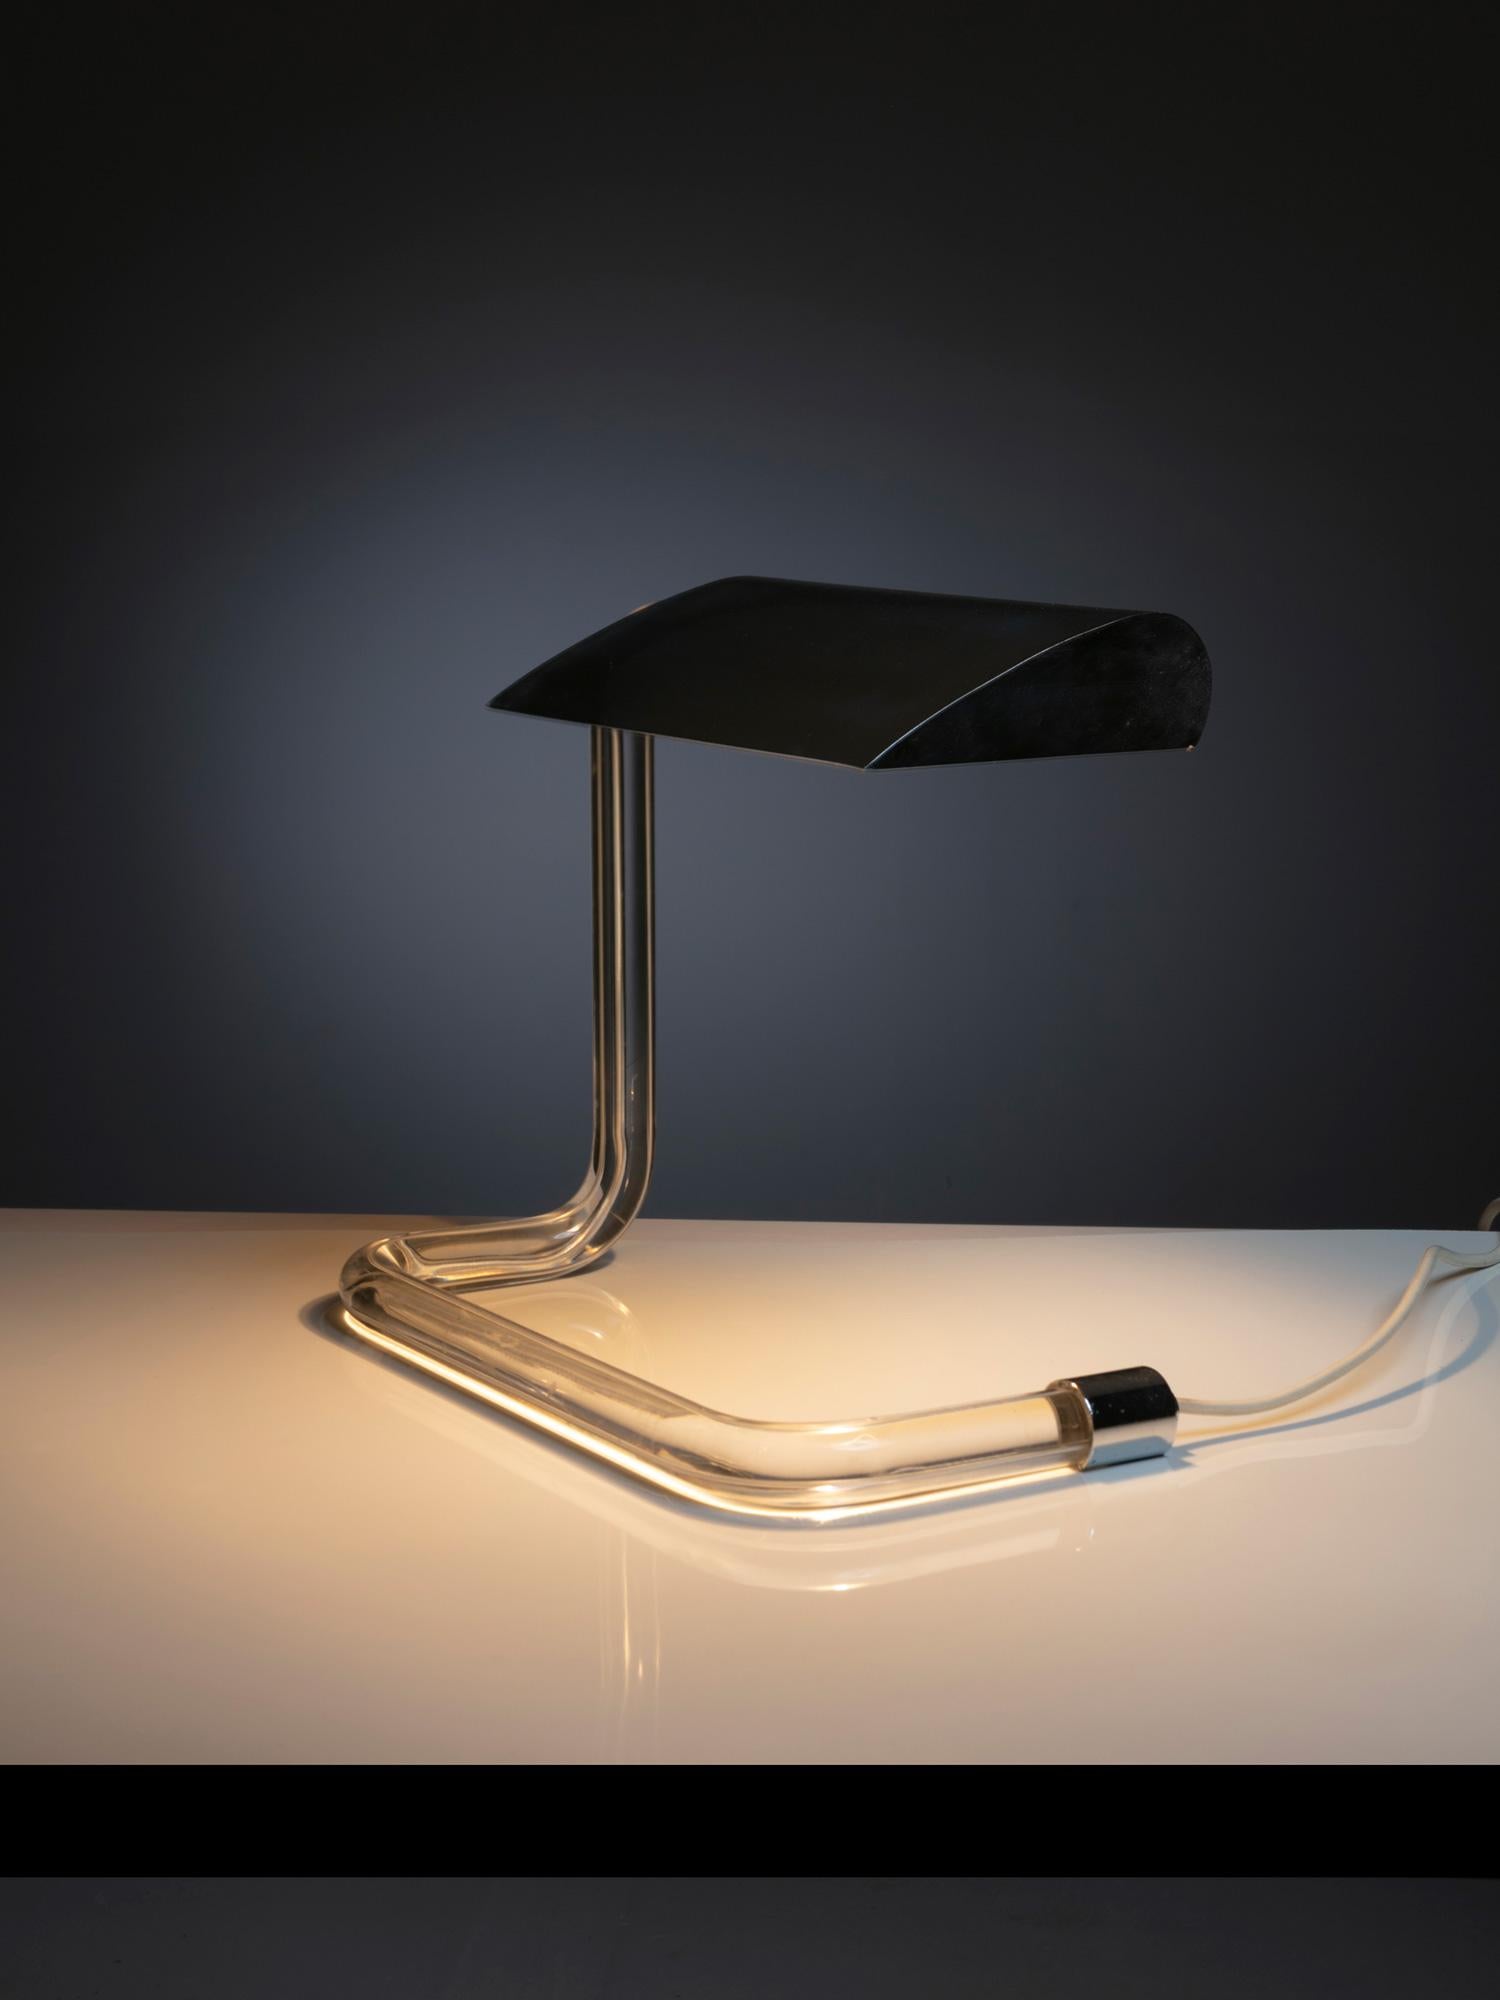 Crylicord series table lamp by Peter Hamburger for Knoll
Plexiglass curved body and sleek polished chrome shade.